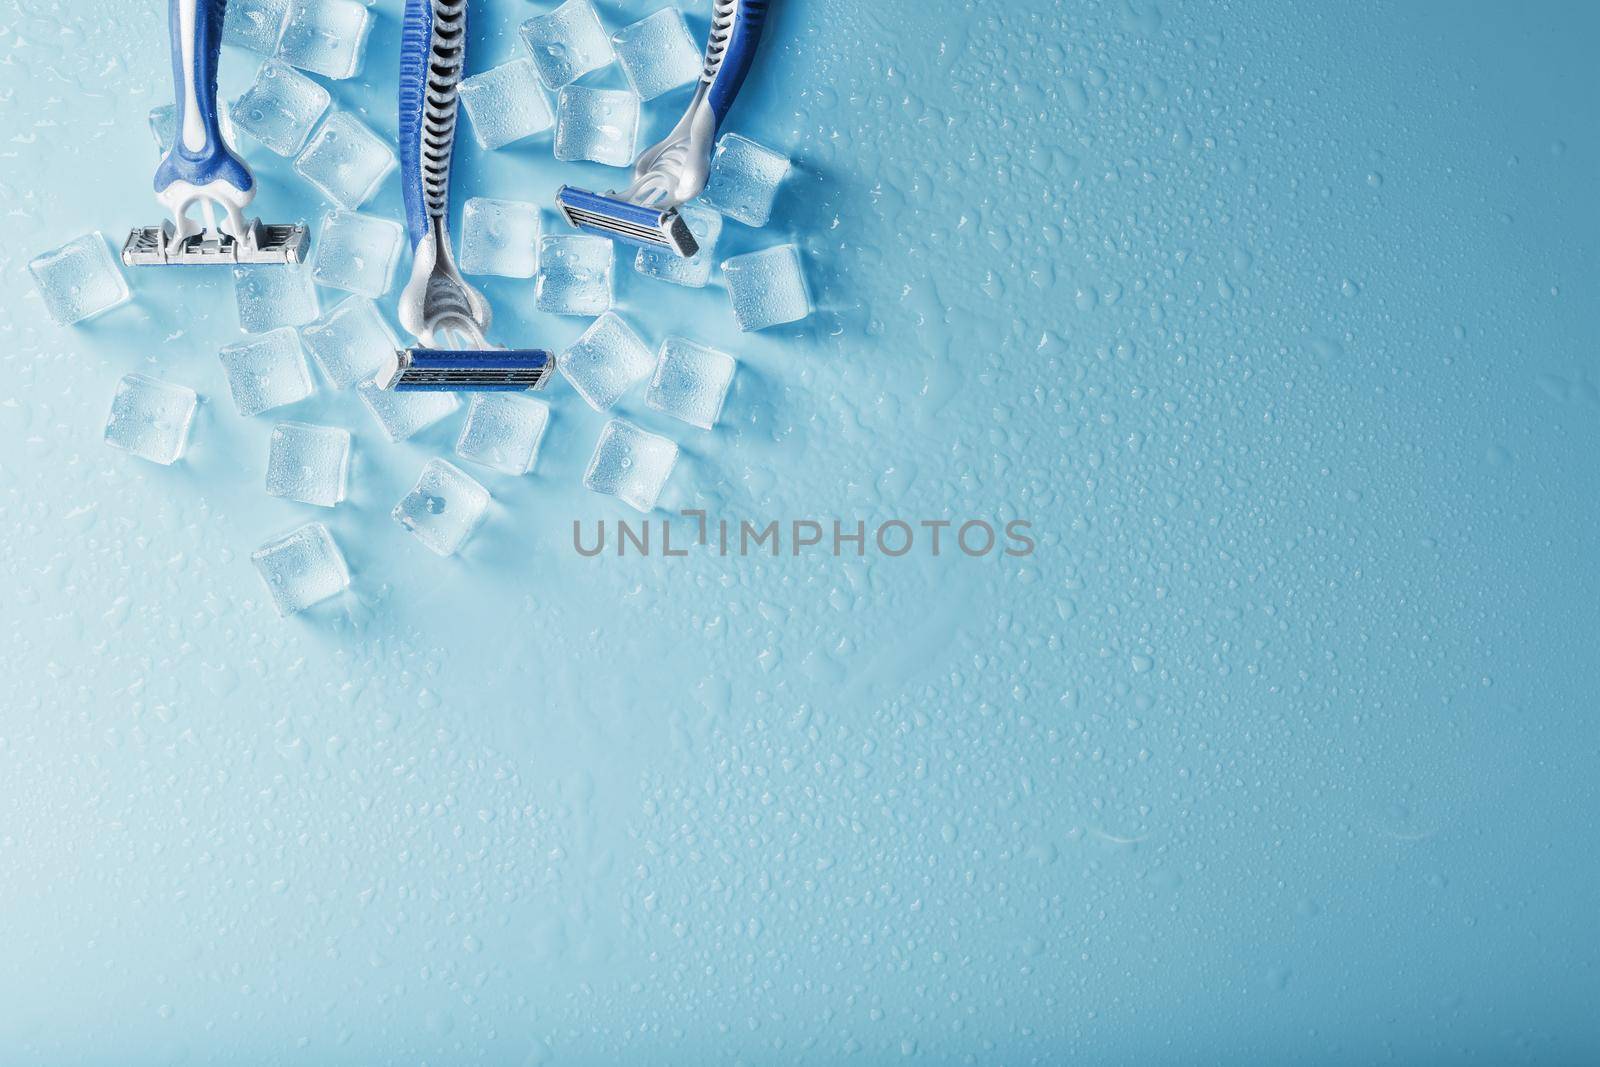 Blue shaving machines in a row on a blue background with ice cubes. The concept of cleanliness and frosty freshness